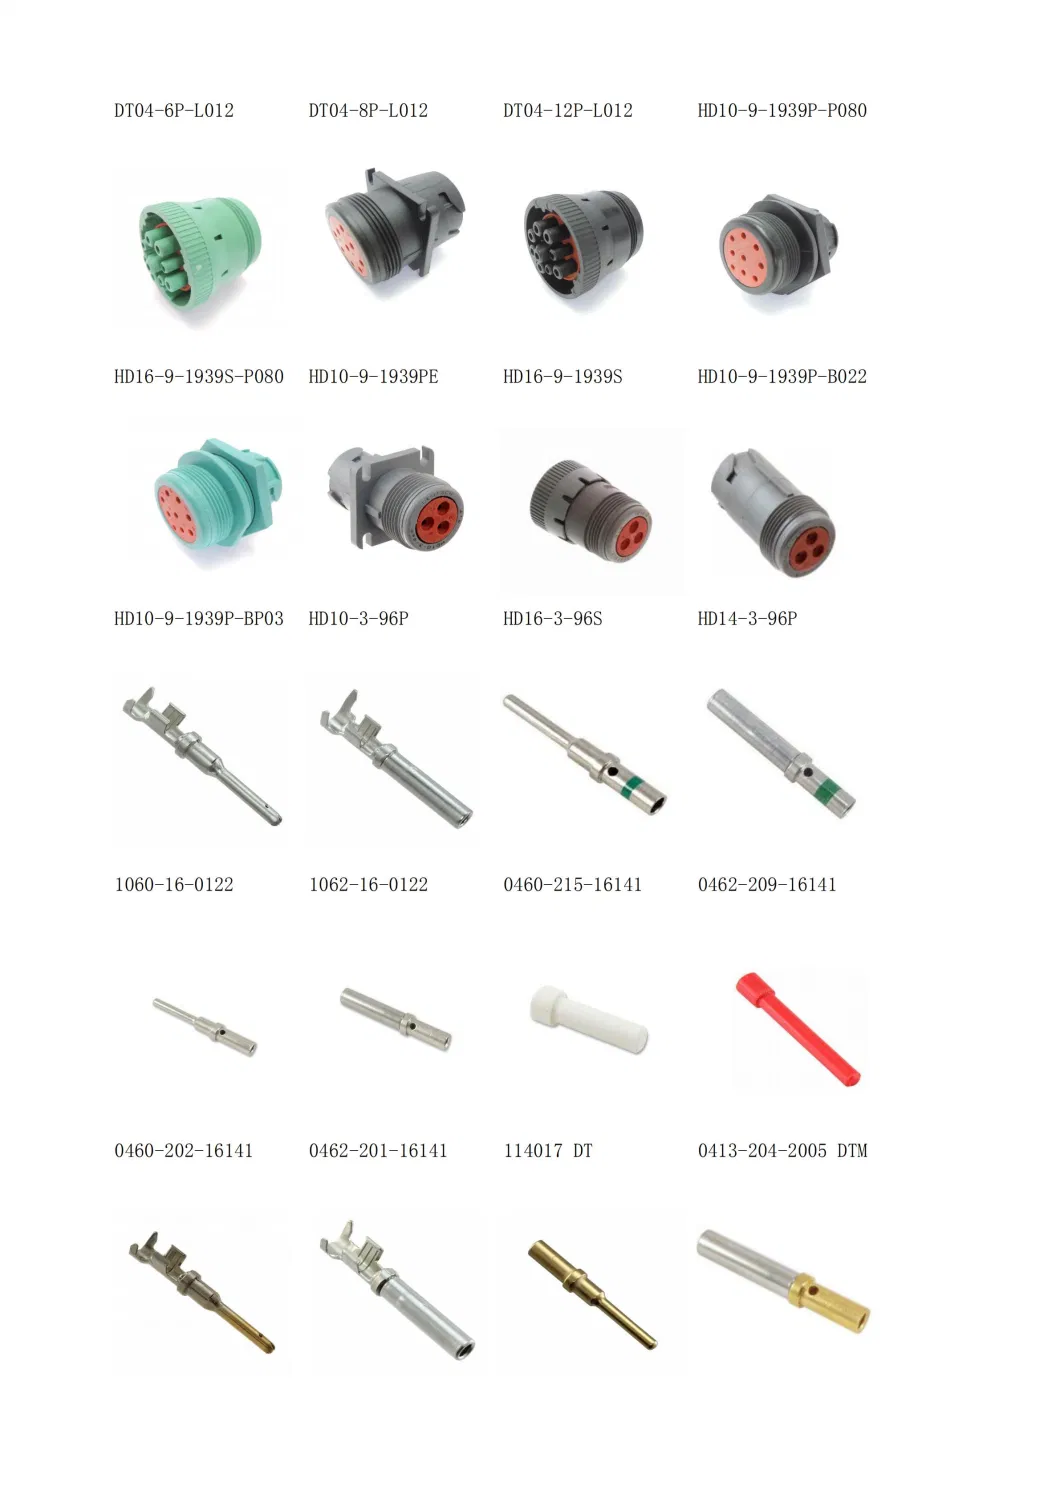 Deutsch 1 Pin Way Female Male Housing Adapter PA66 Waterproof Automotive Wire Connector Plug Dthd06-1-8s Dthd04-1-8p Dthd04-1-12p Dthd04-1-4p